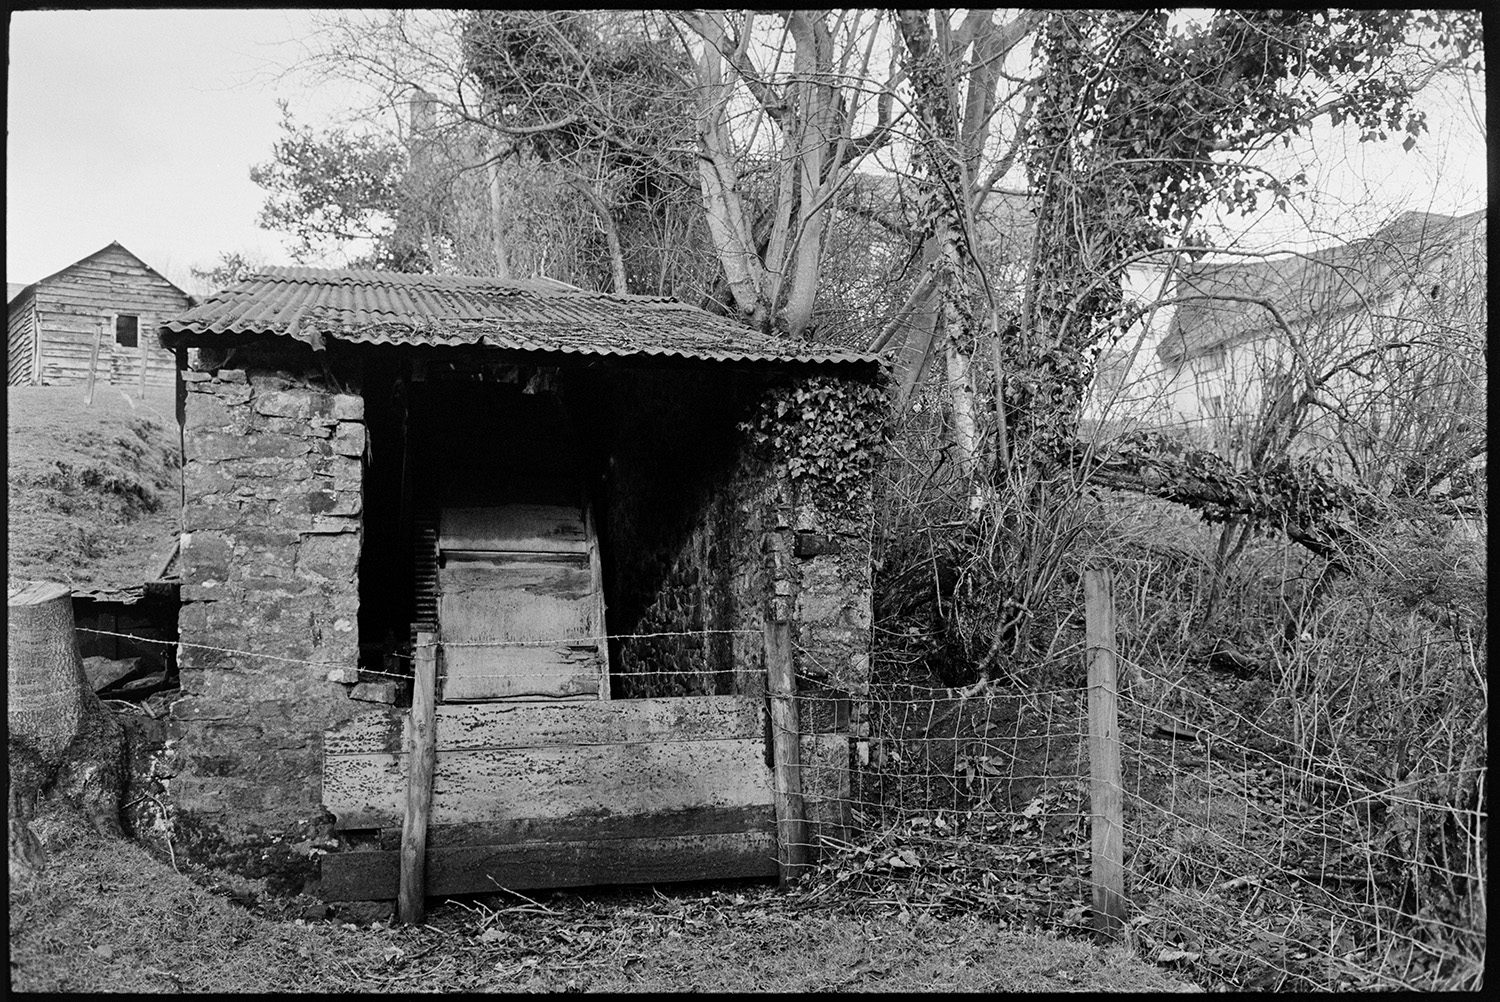 Undershot mill and wheel housing.
[Undershot mill and wheel housing in a small stone shed with a corrugated iron roof at West Chapple Farm, near Winkleigh. It is surrounded by a wire fence and trees, with farm buildings in the background.]